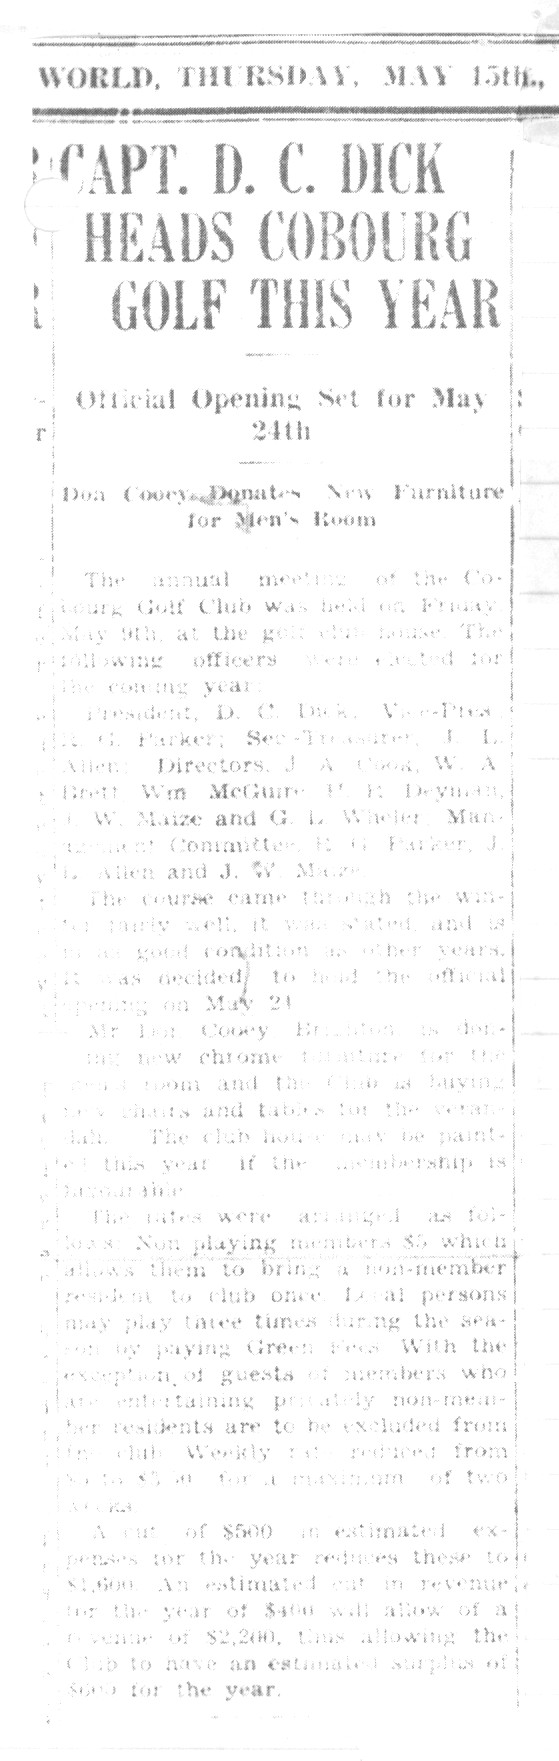 1941-05-15 Golf -election of officers